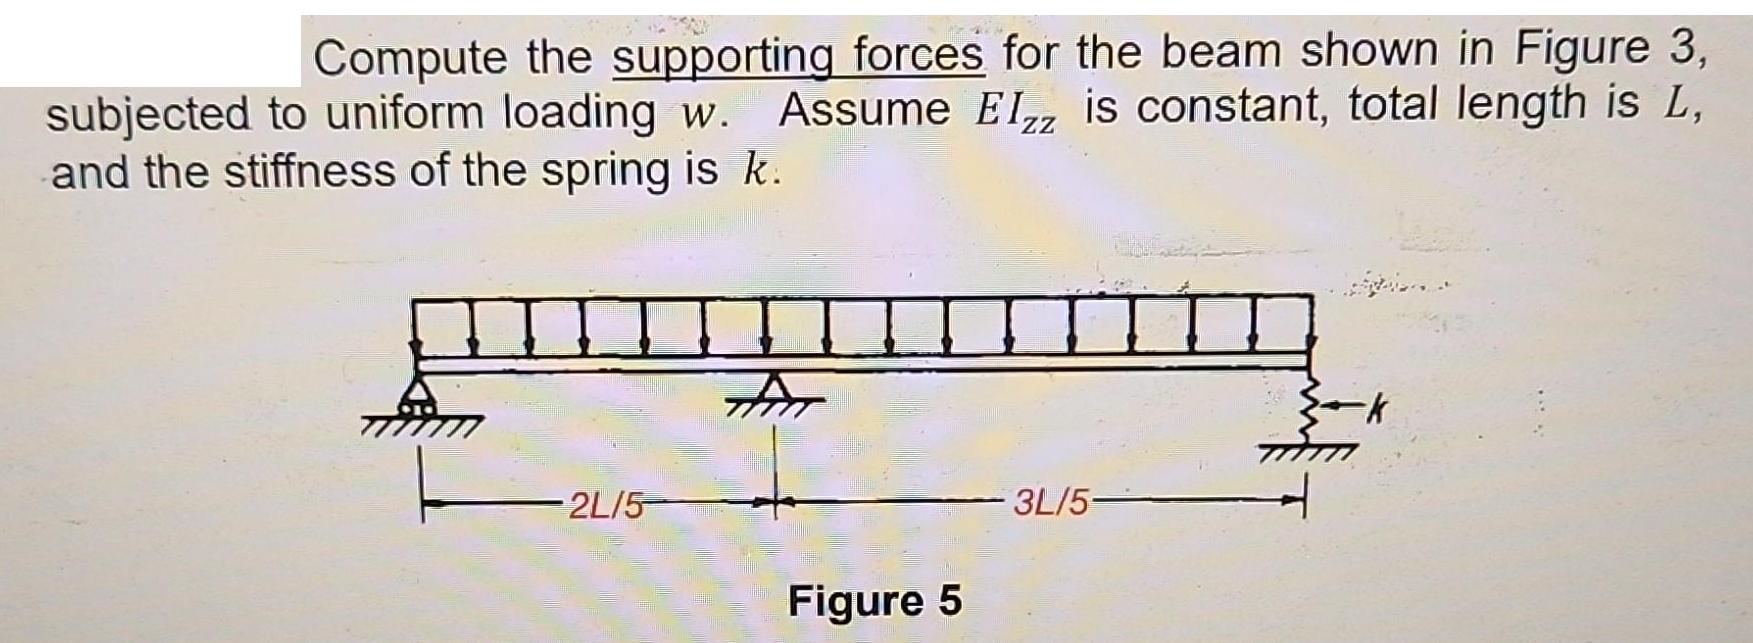 Compute the supporting forces for the beam shown in Figure 3, subjected to uniform loading w. Assume Elzz is